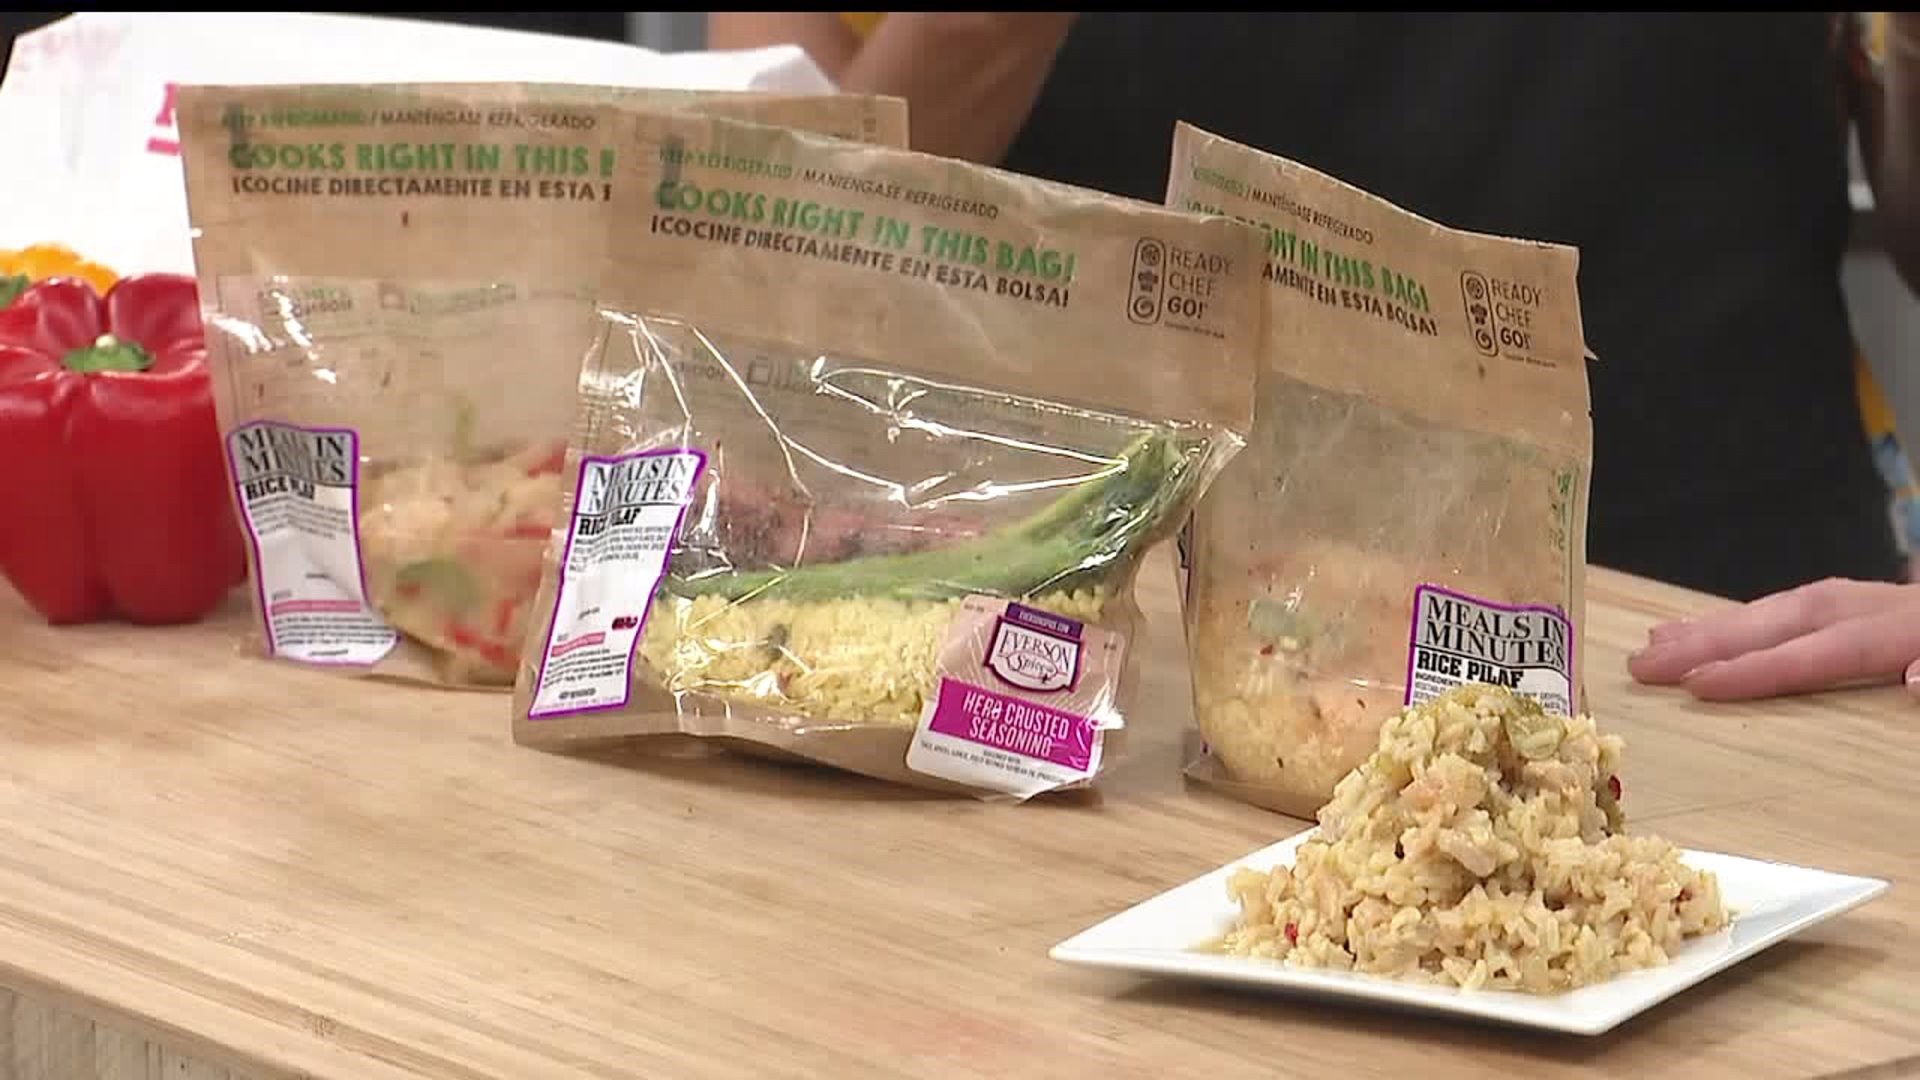 In the Kitchen with Fareway: Meals in Minutes